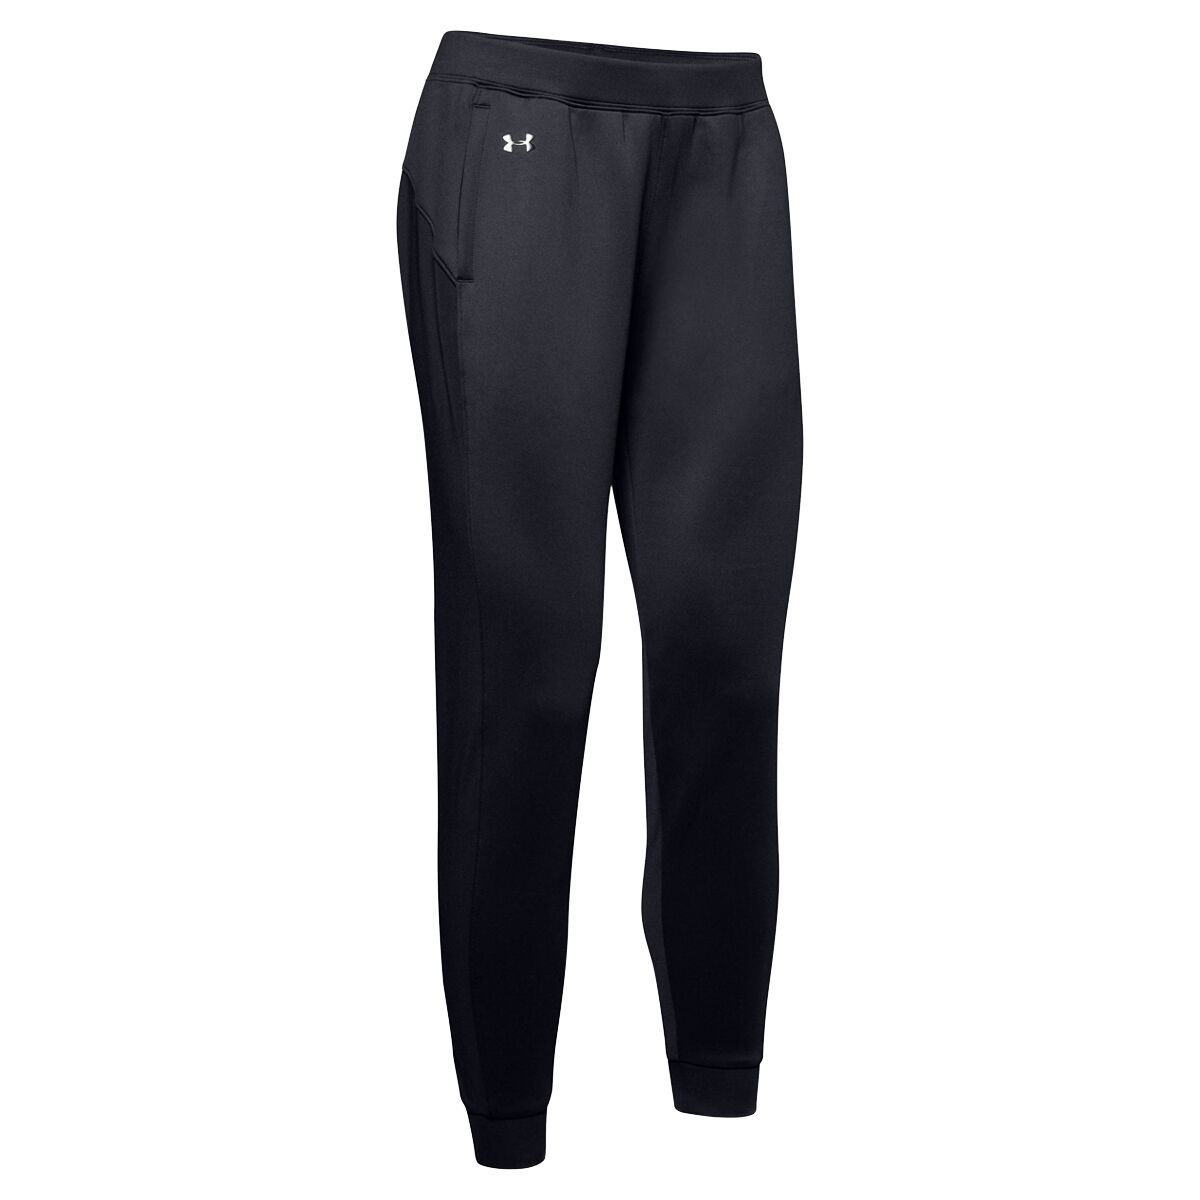 under armor cold gear pants